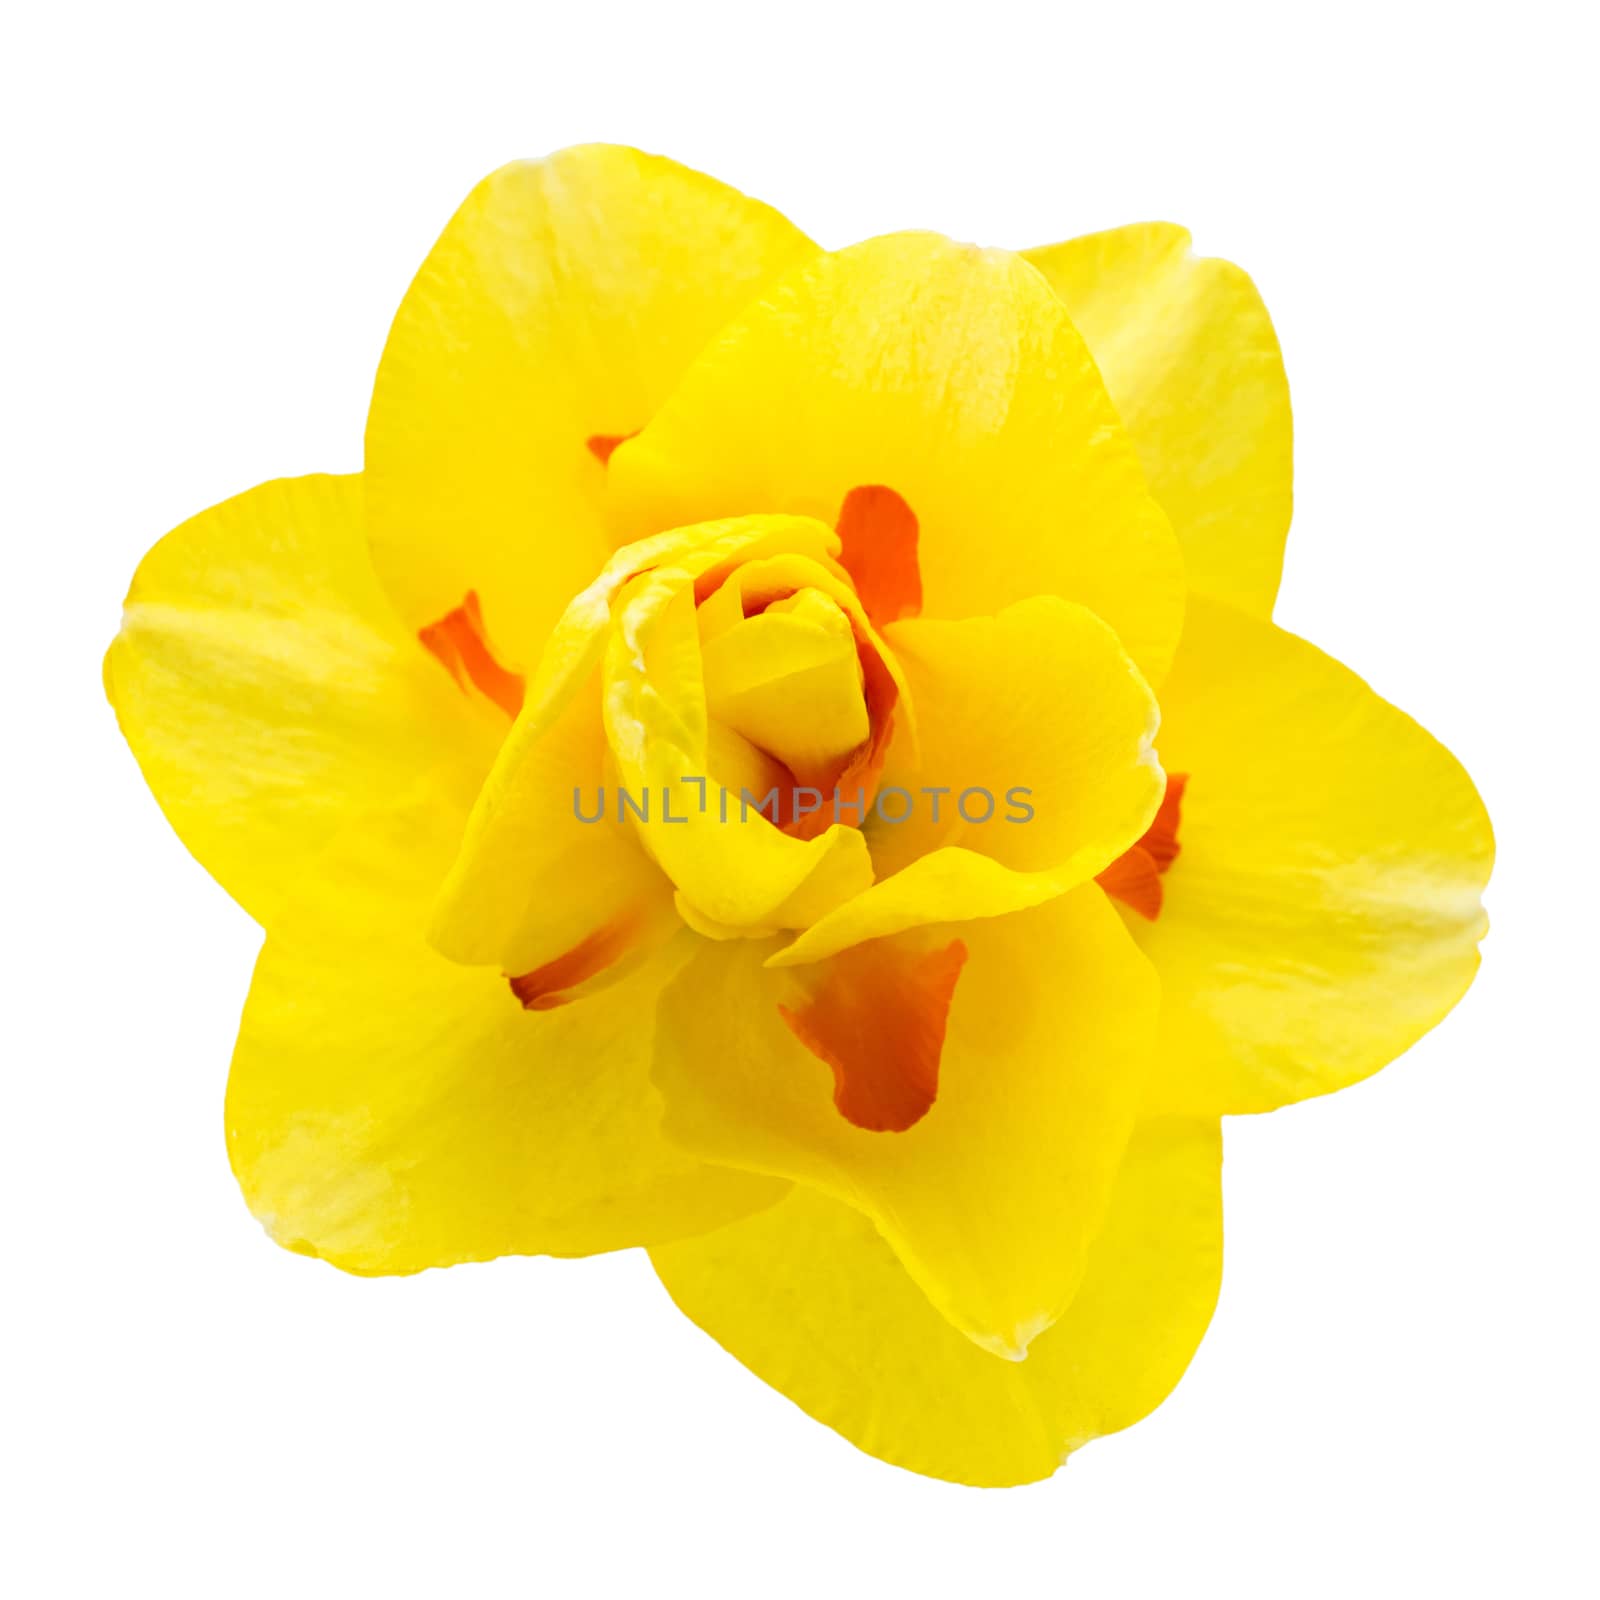 Narcissus flower isolated on a white background by hemerocallis